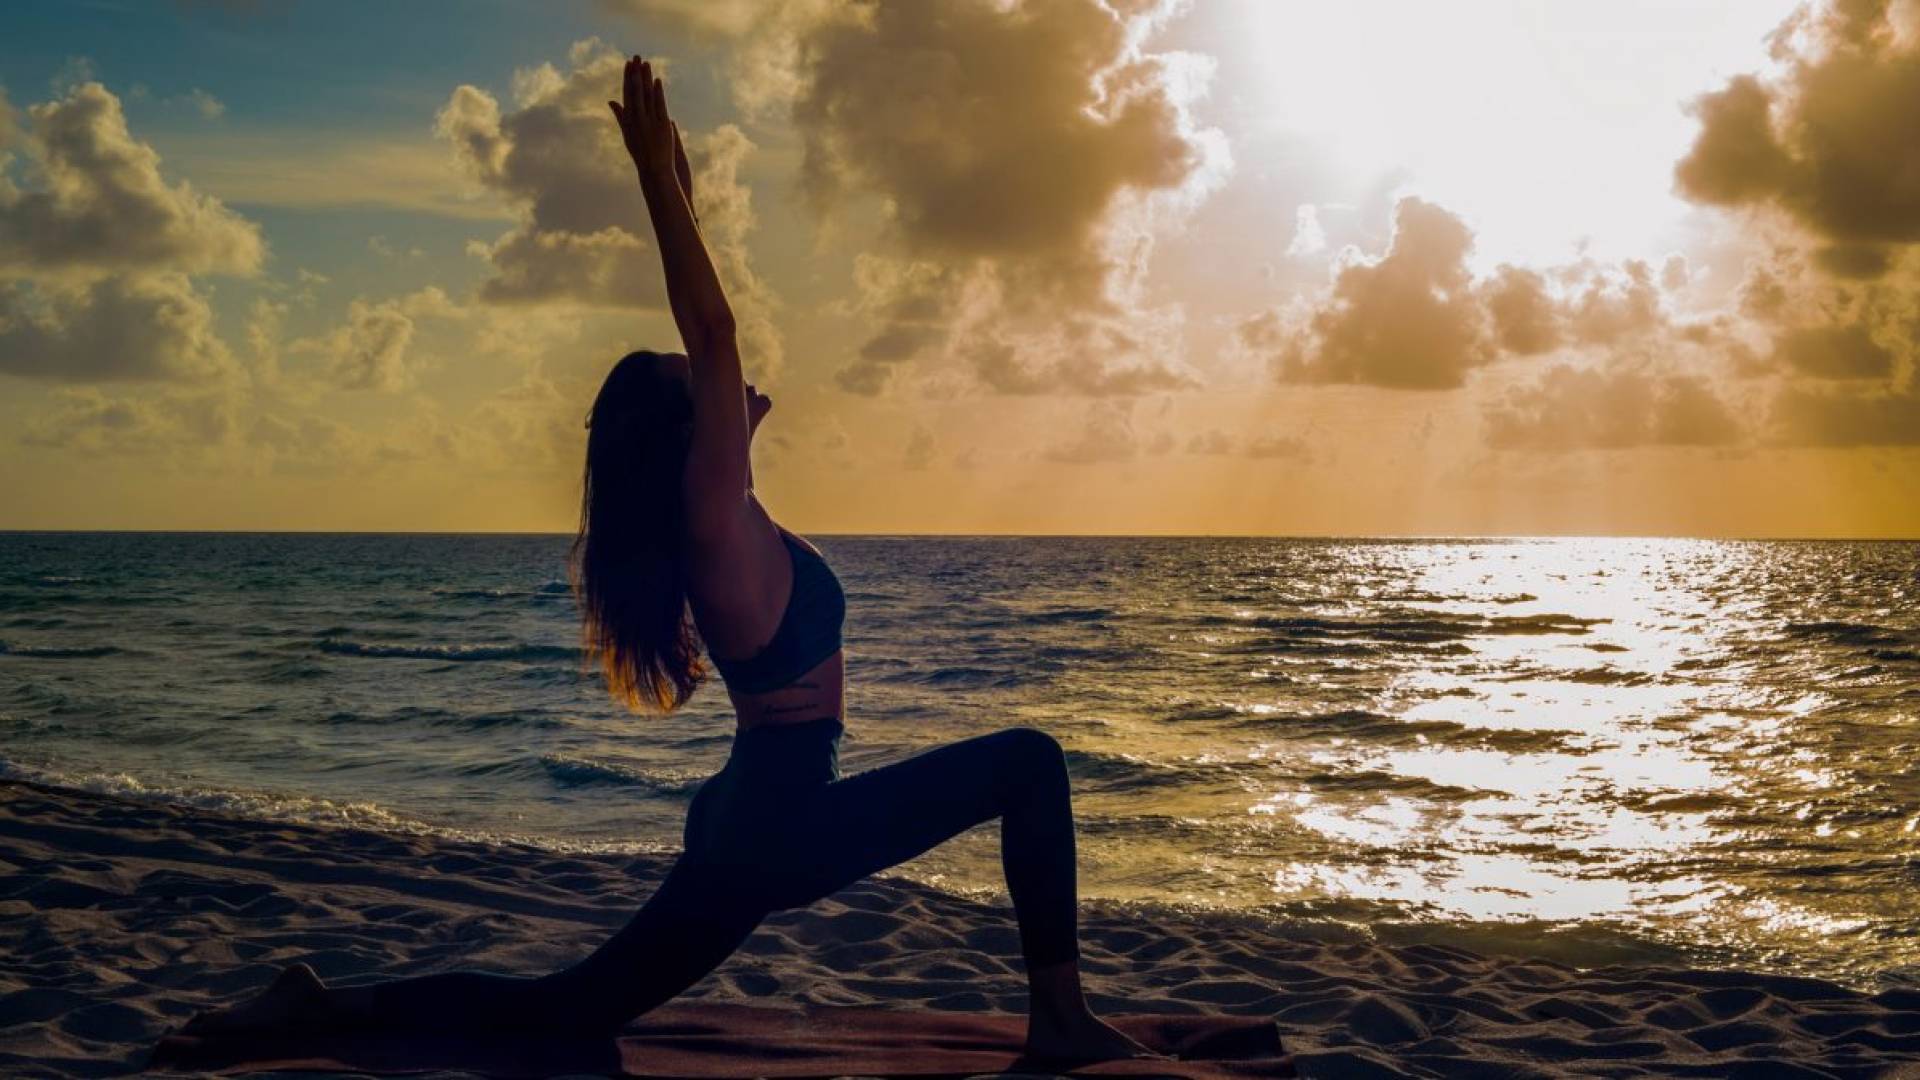 Woman doing yoga on beach overlooking the ocean at sunset